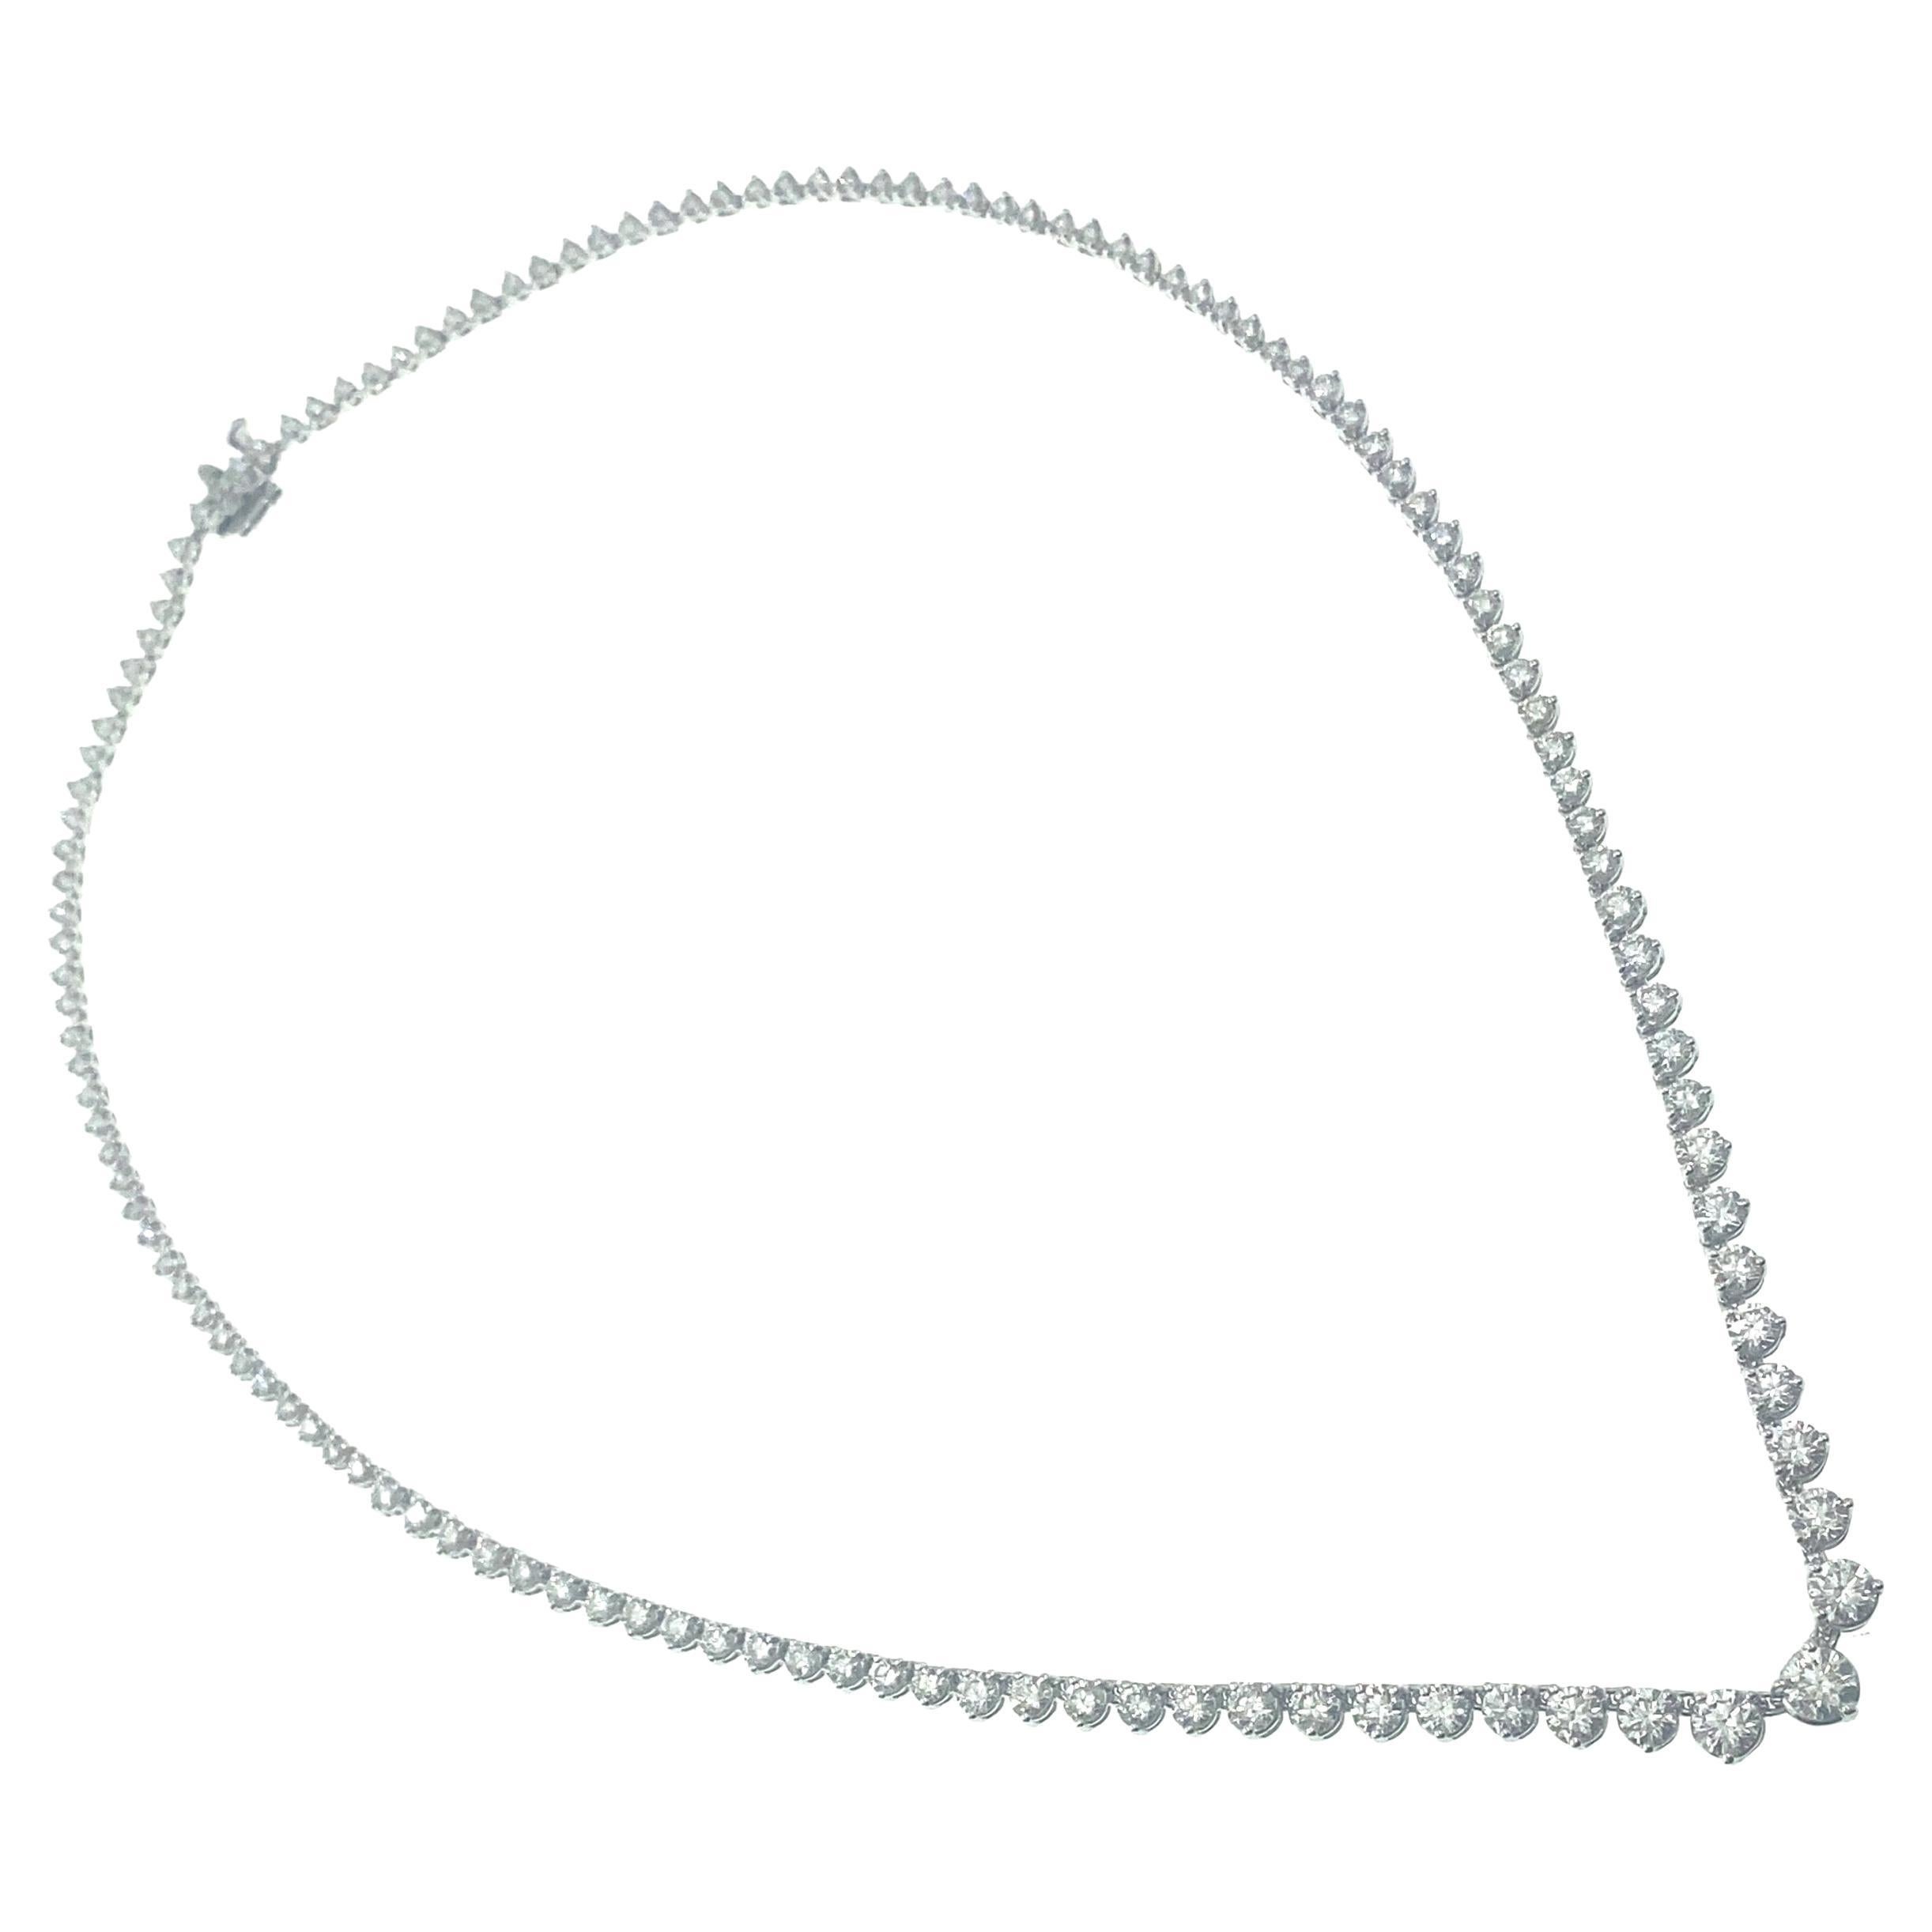 Diamond Riviera Necklace 7.00 tcw in 14kt White Gold